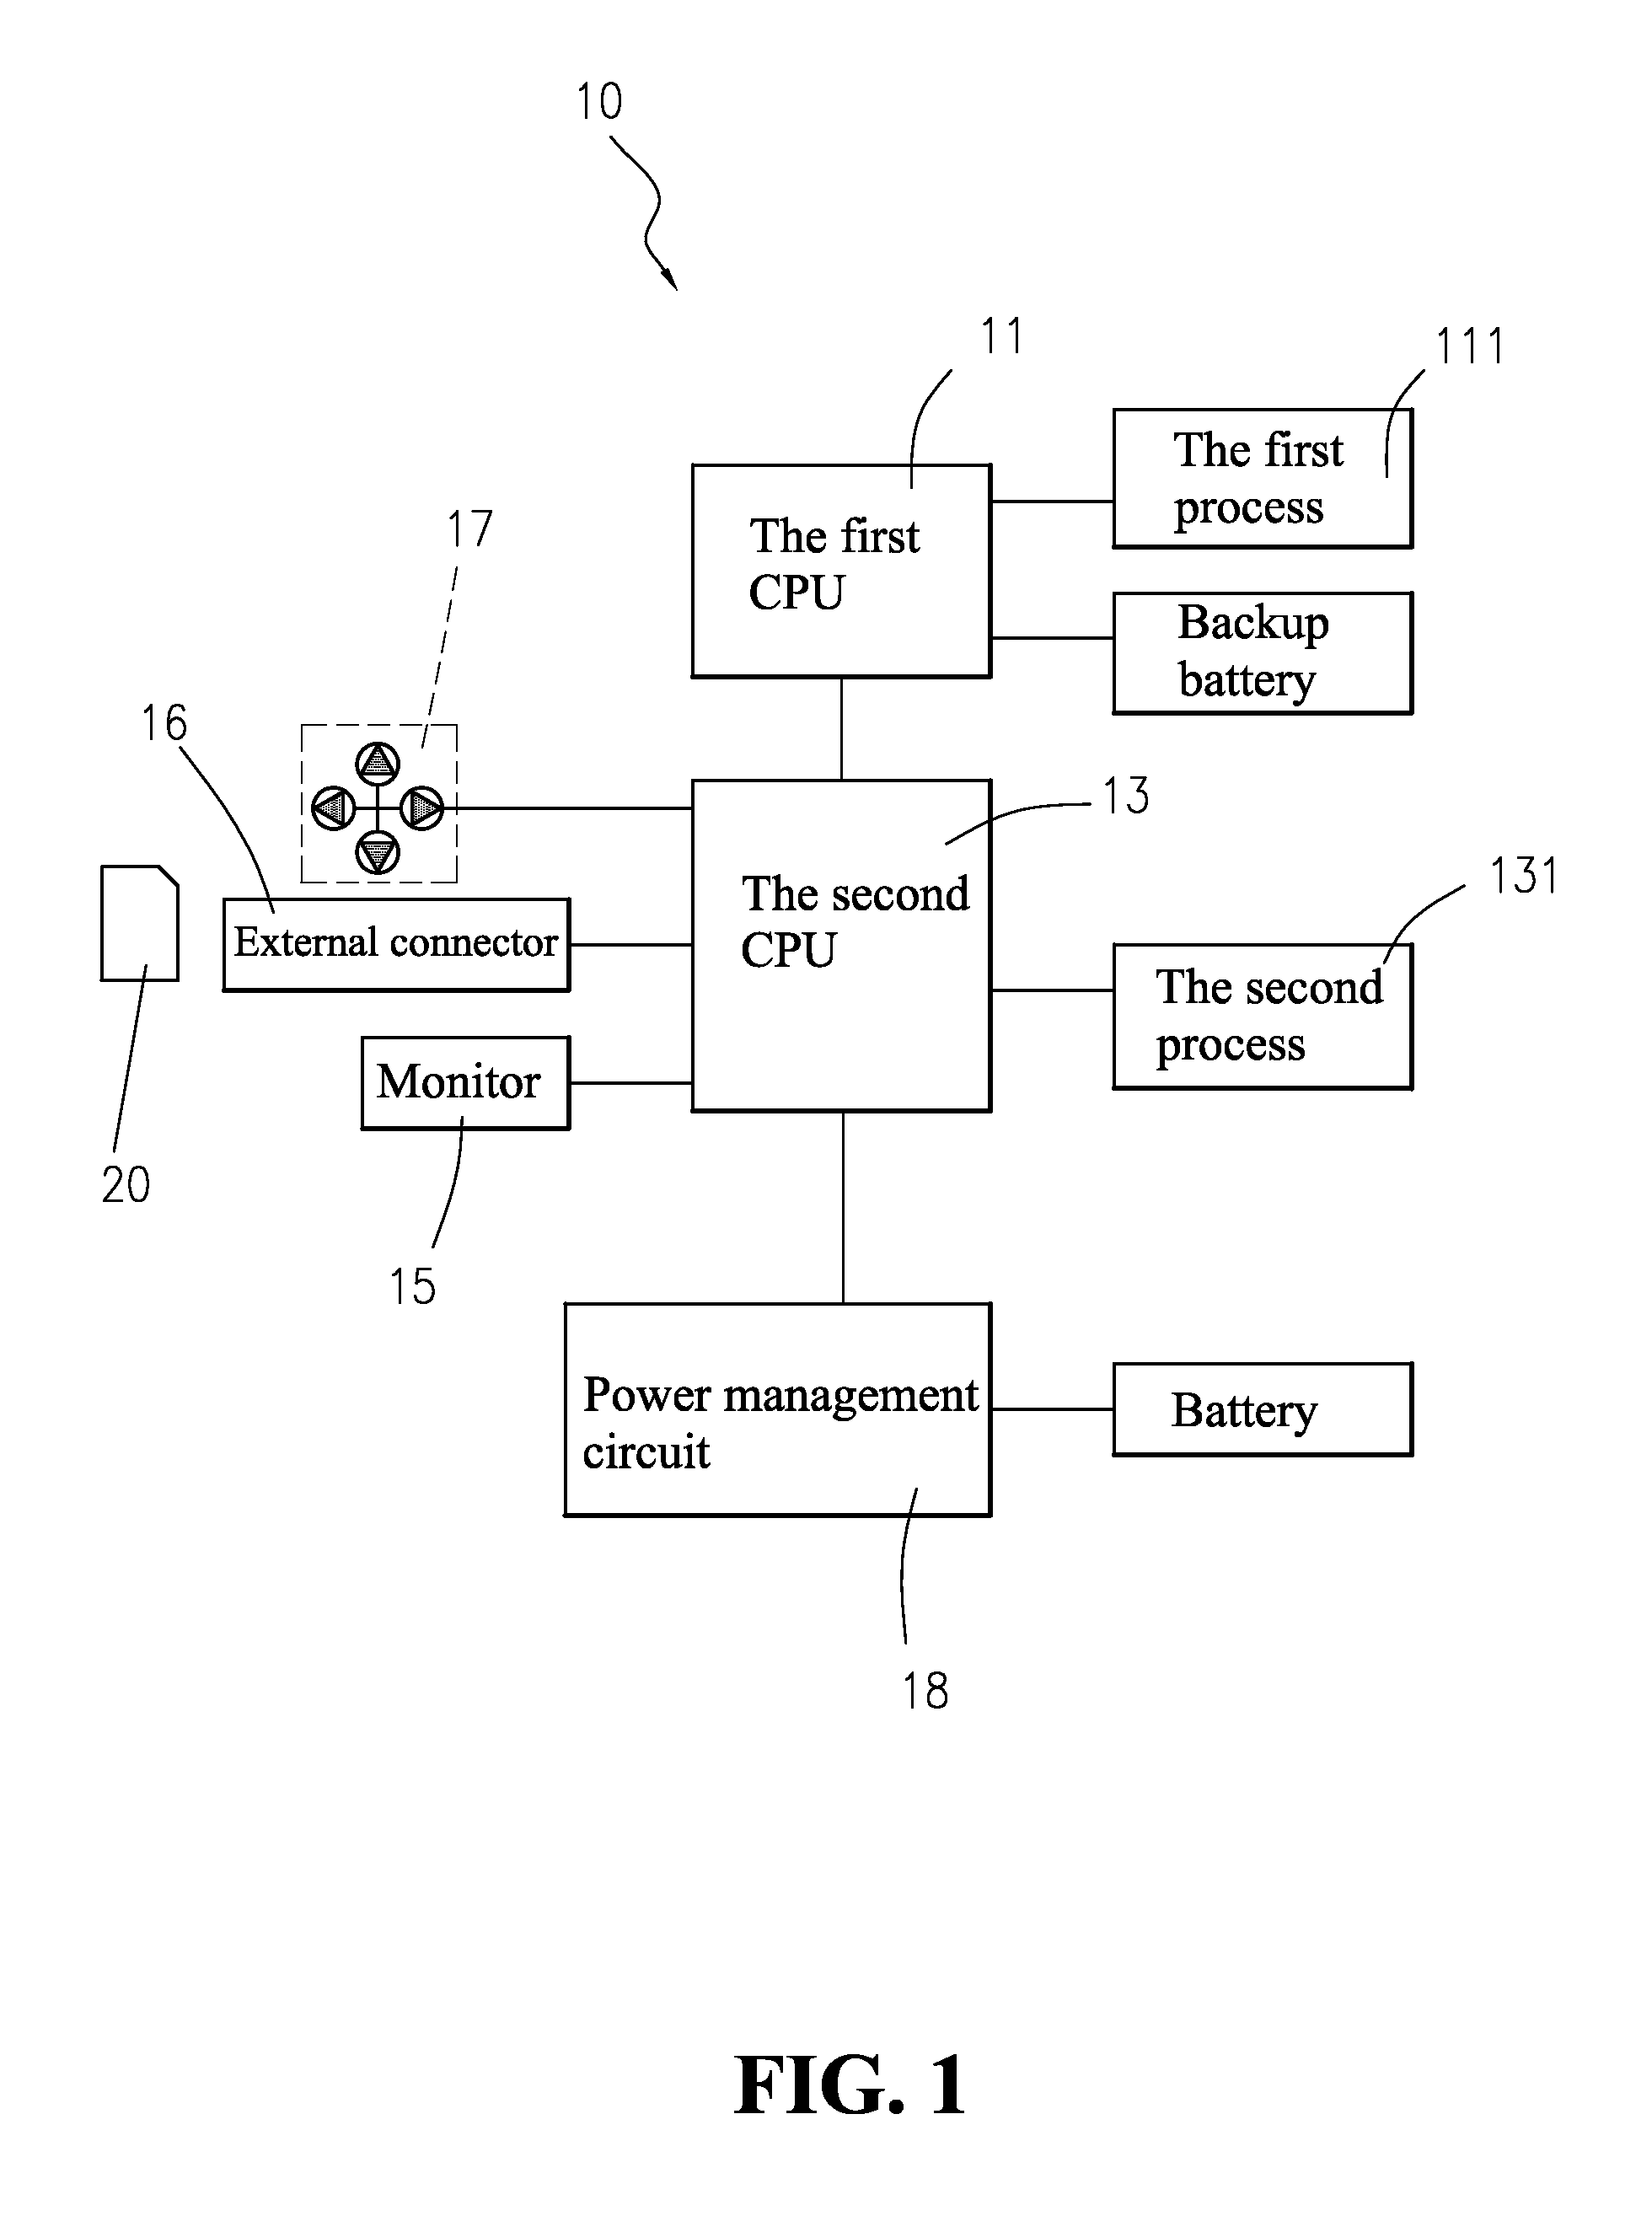 Electronic data processing device with dual-cpu